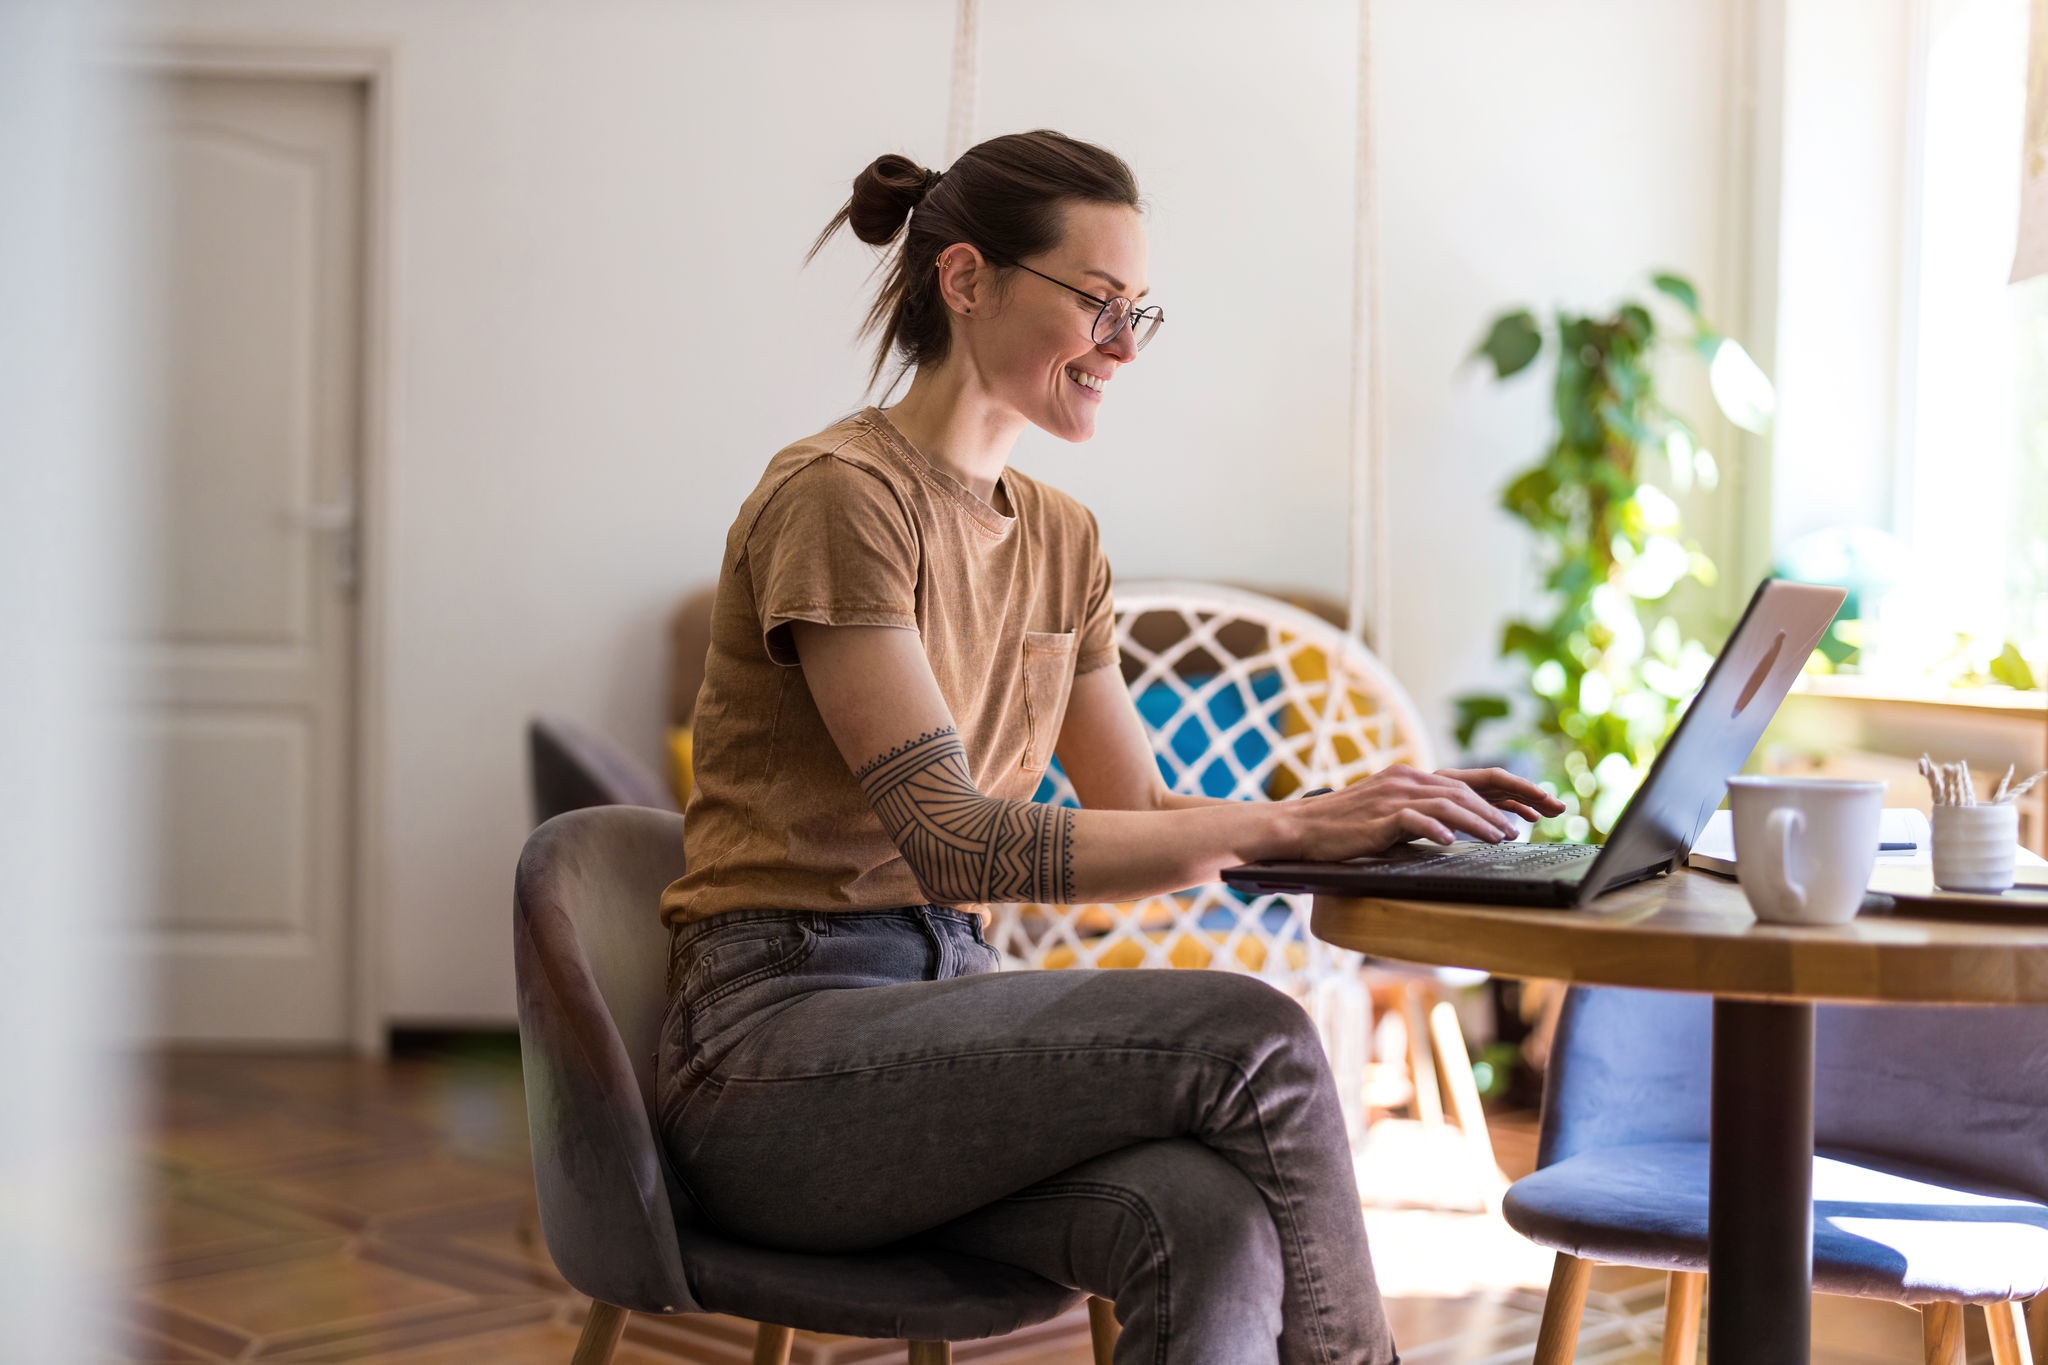 Young woman using a laptop at home